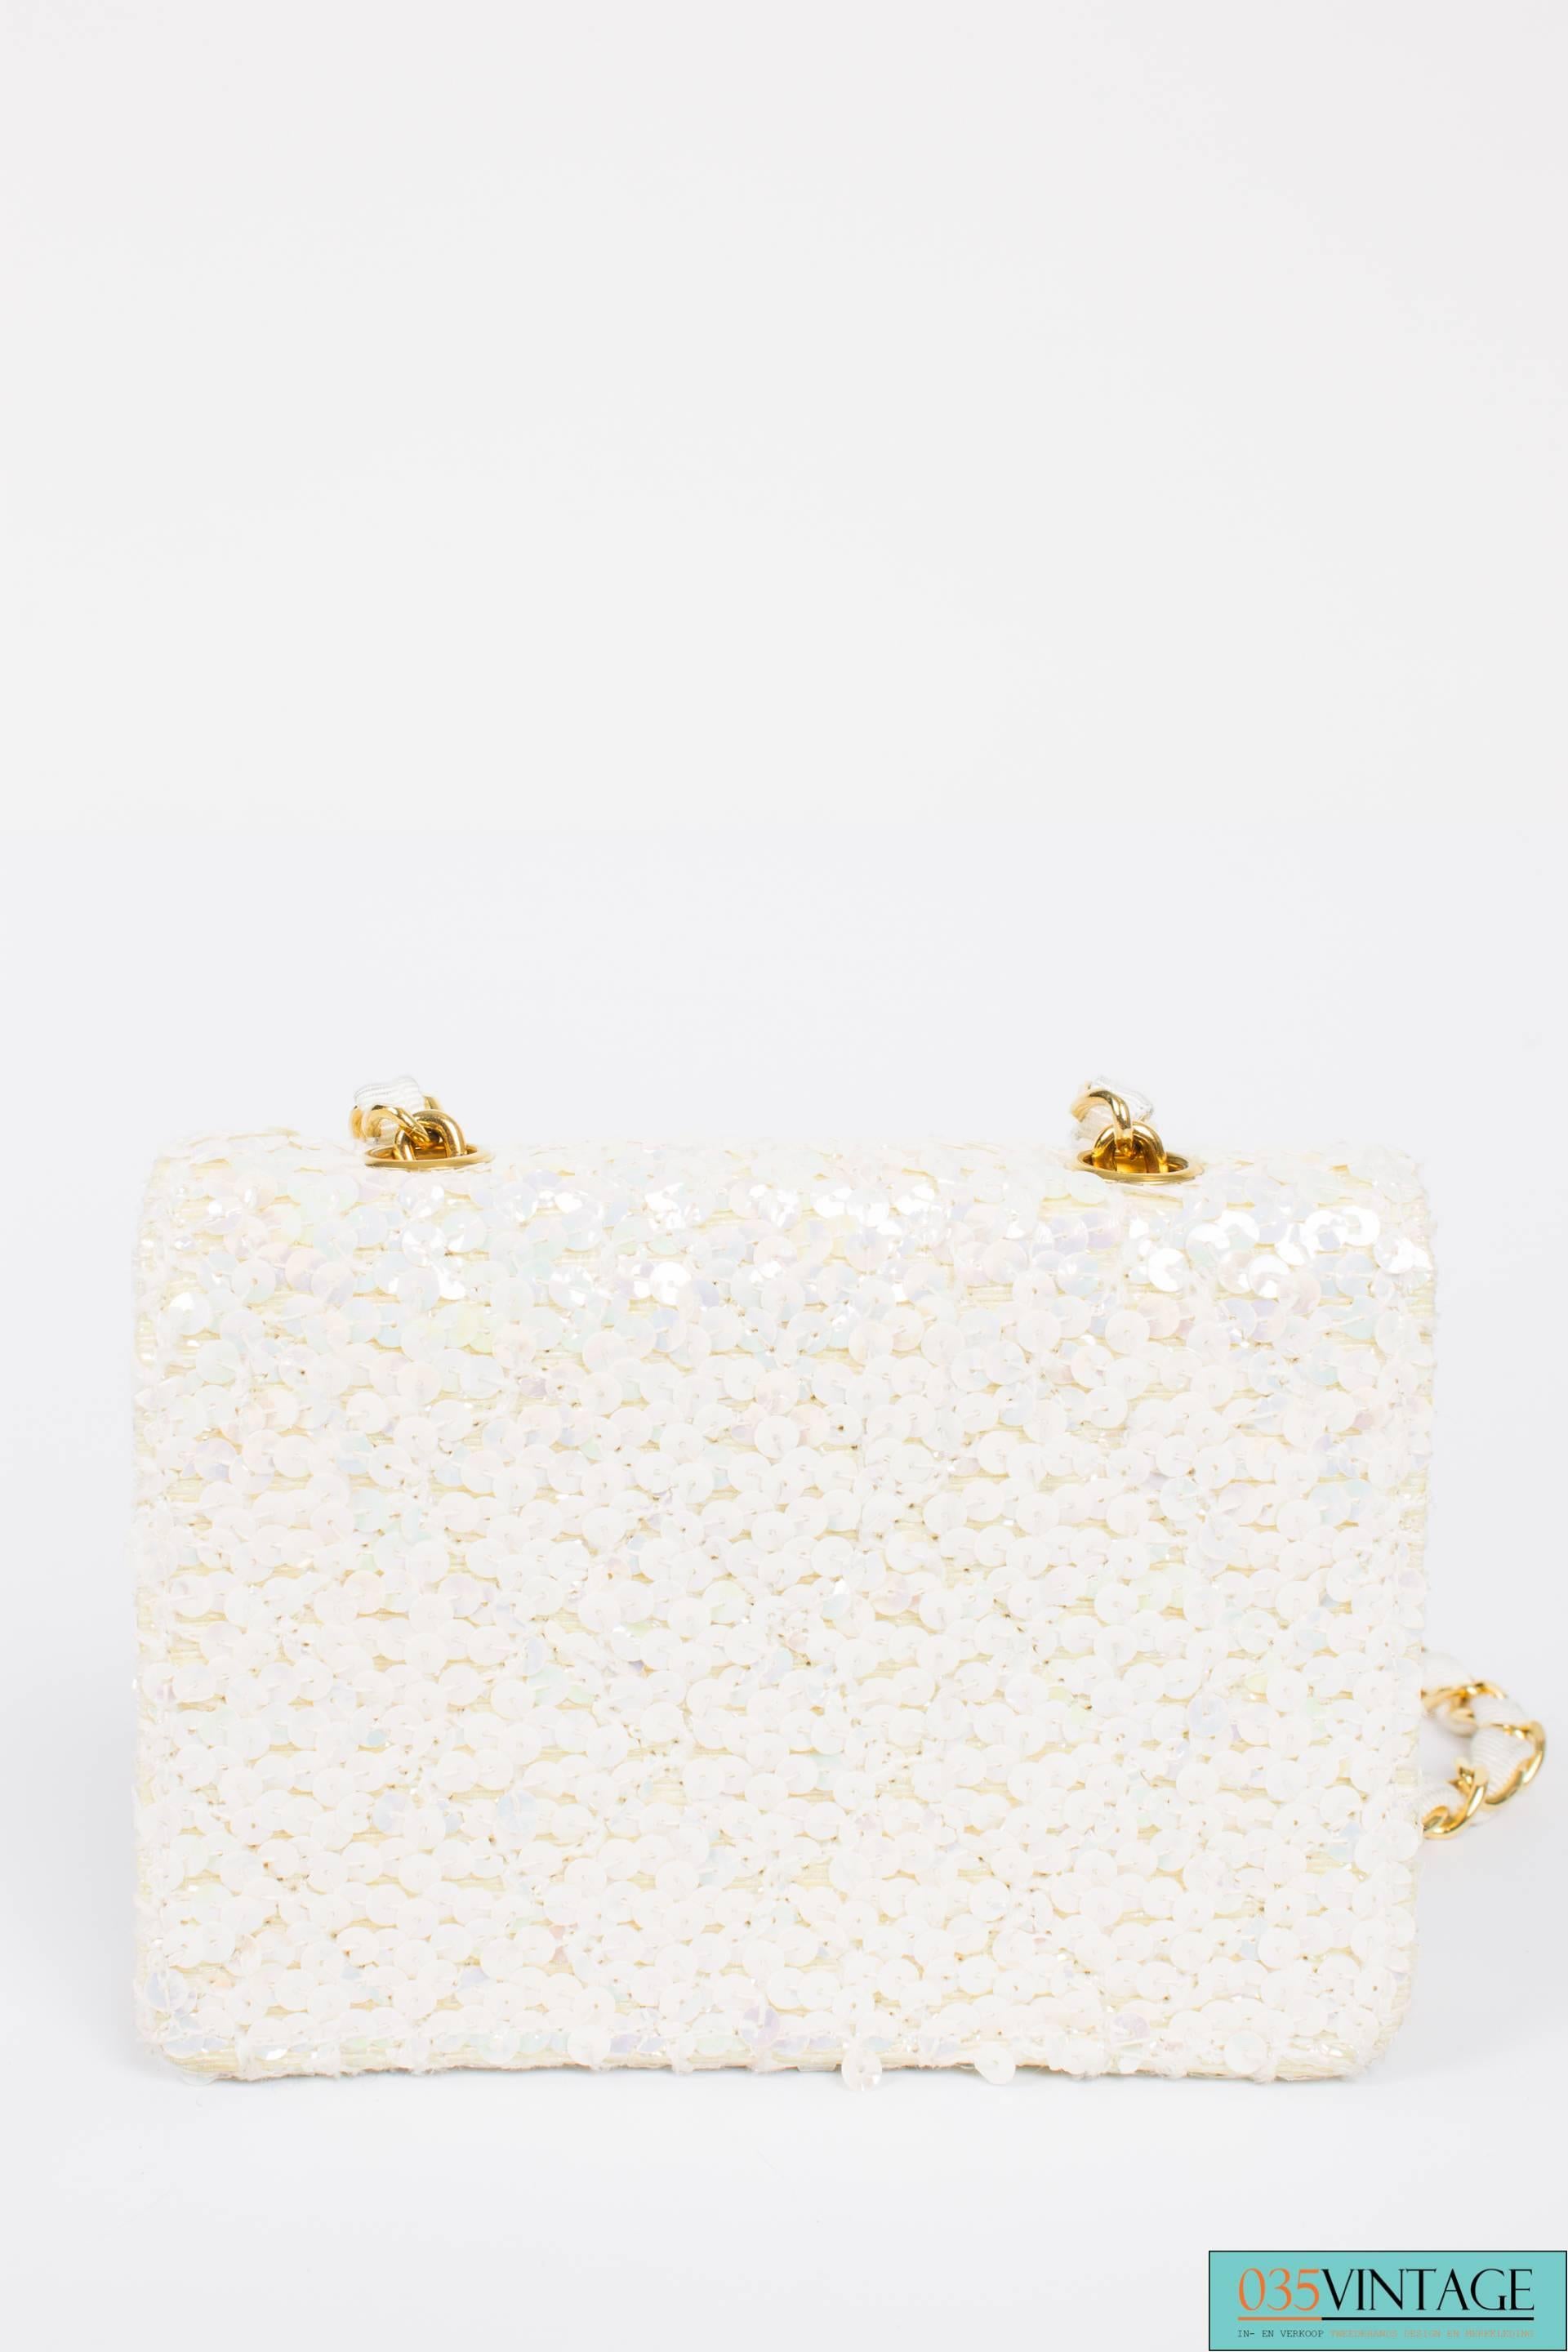 Women's Chanel Iridescent Micro Flap Bag - ivory/sequins/gold